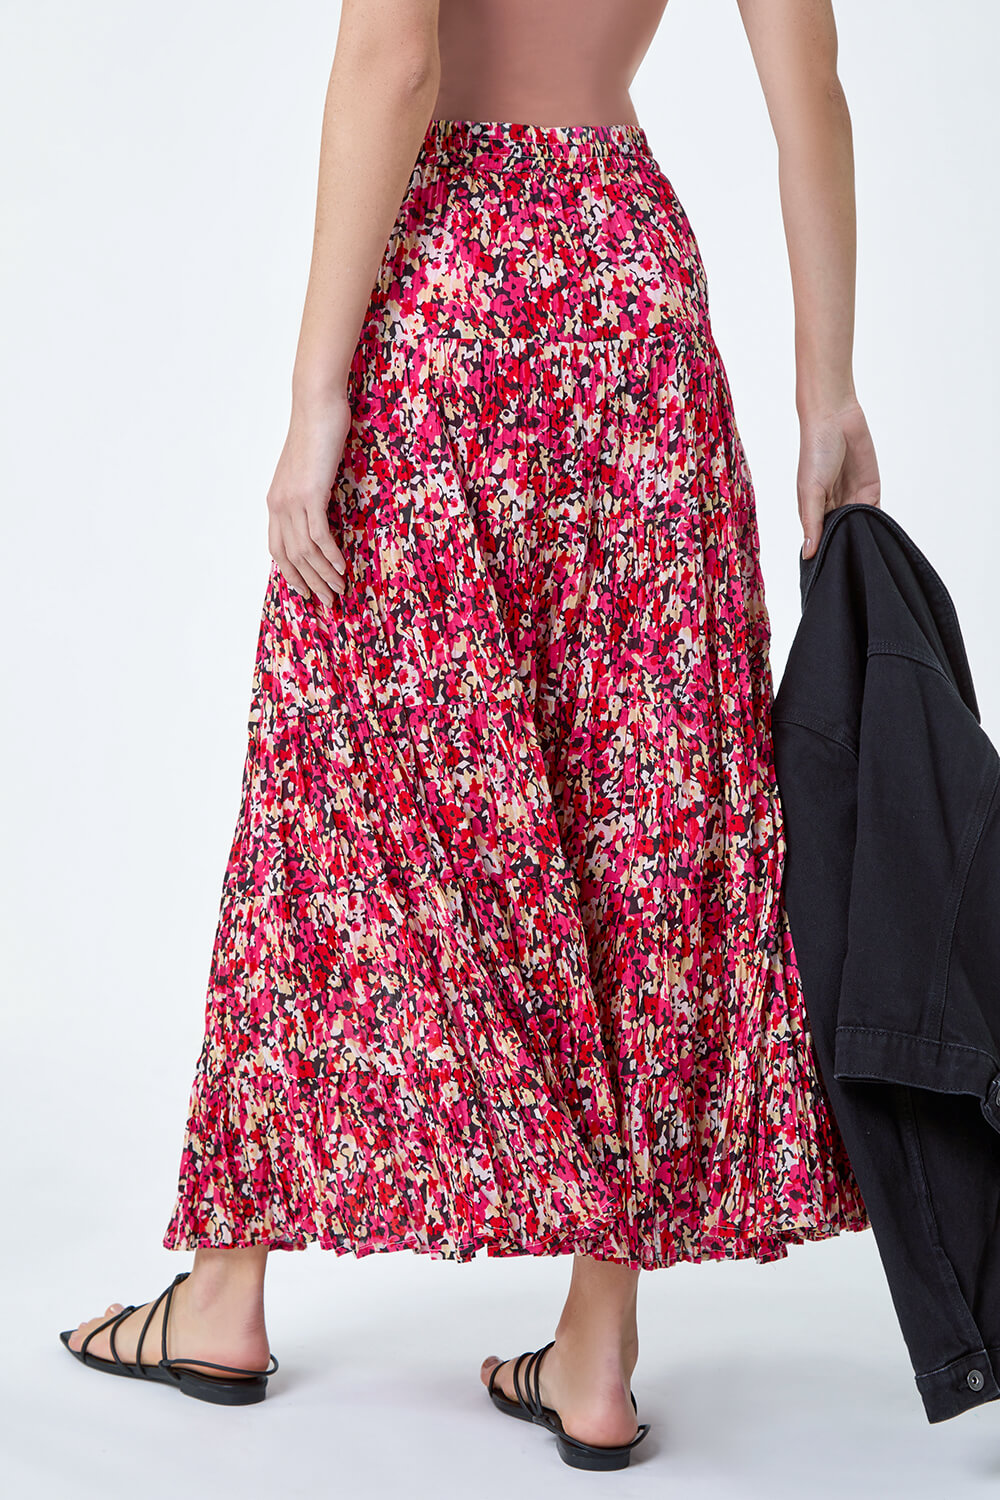 PINK Floral Crinkle Cotton A line Tiered Maxi Skirt, Image 3 of 5